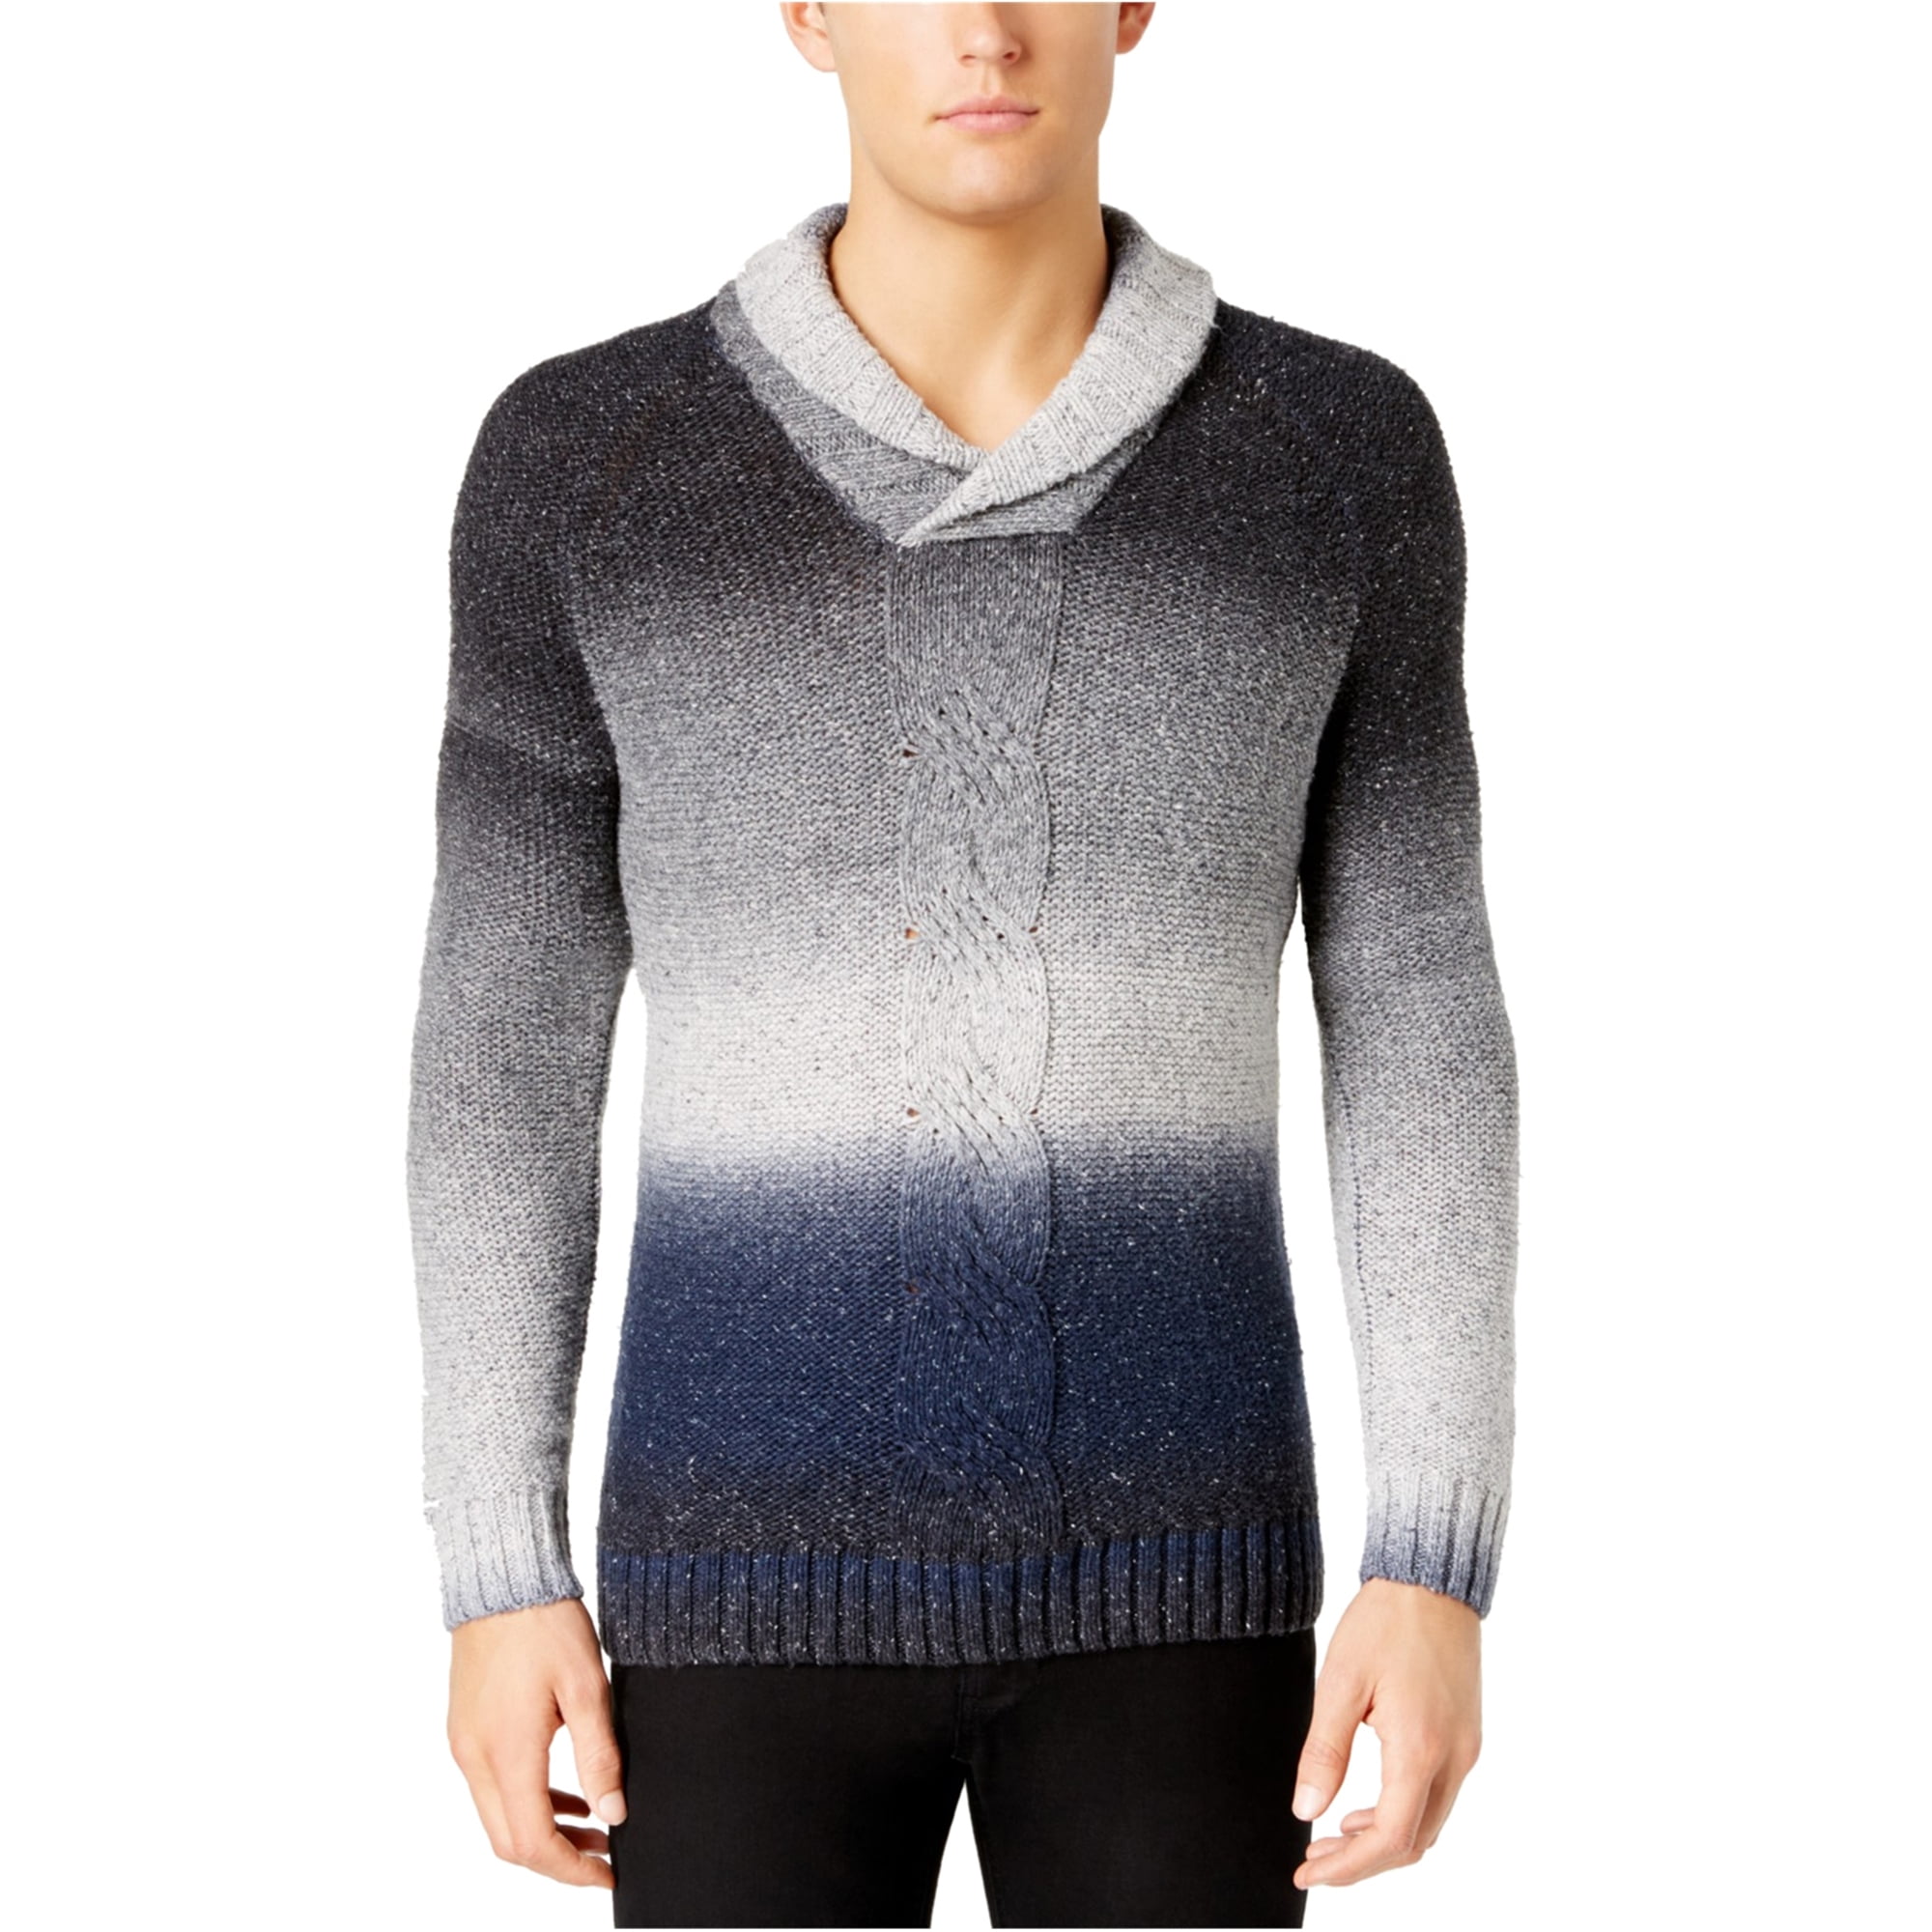 Ombre Speckle Crew Neck Knitted Jumper